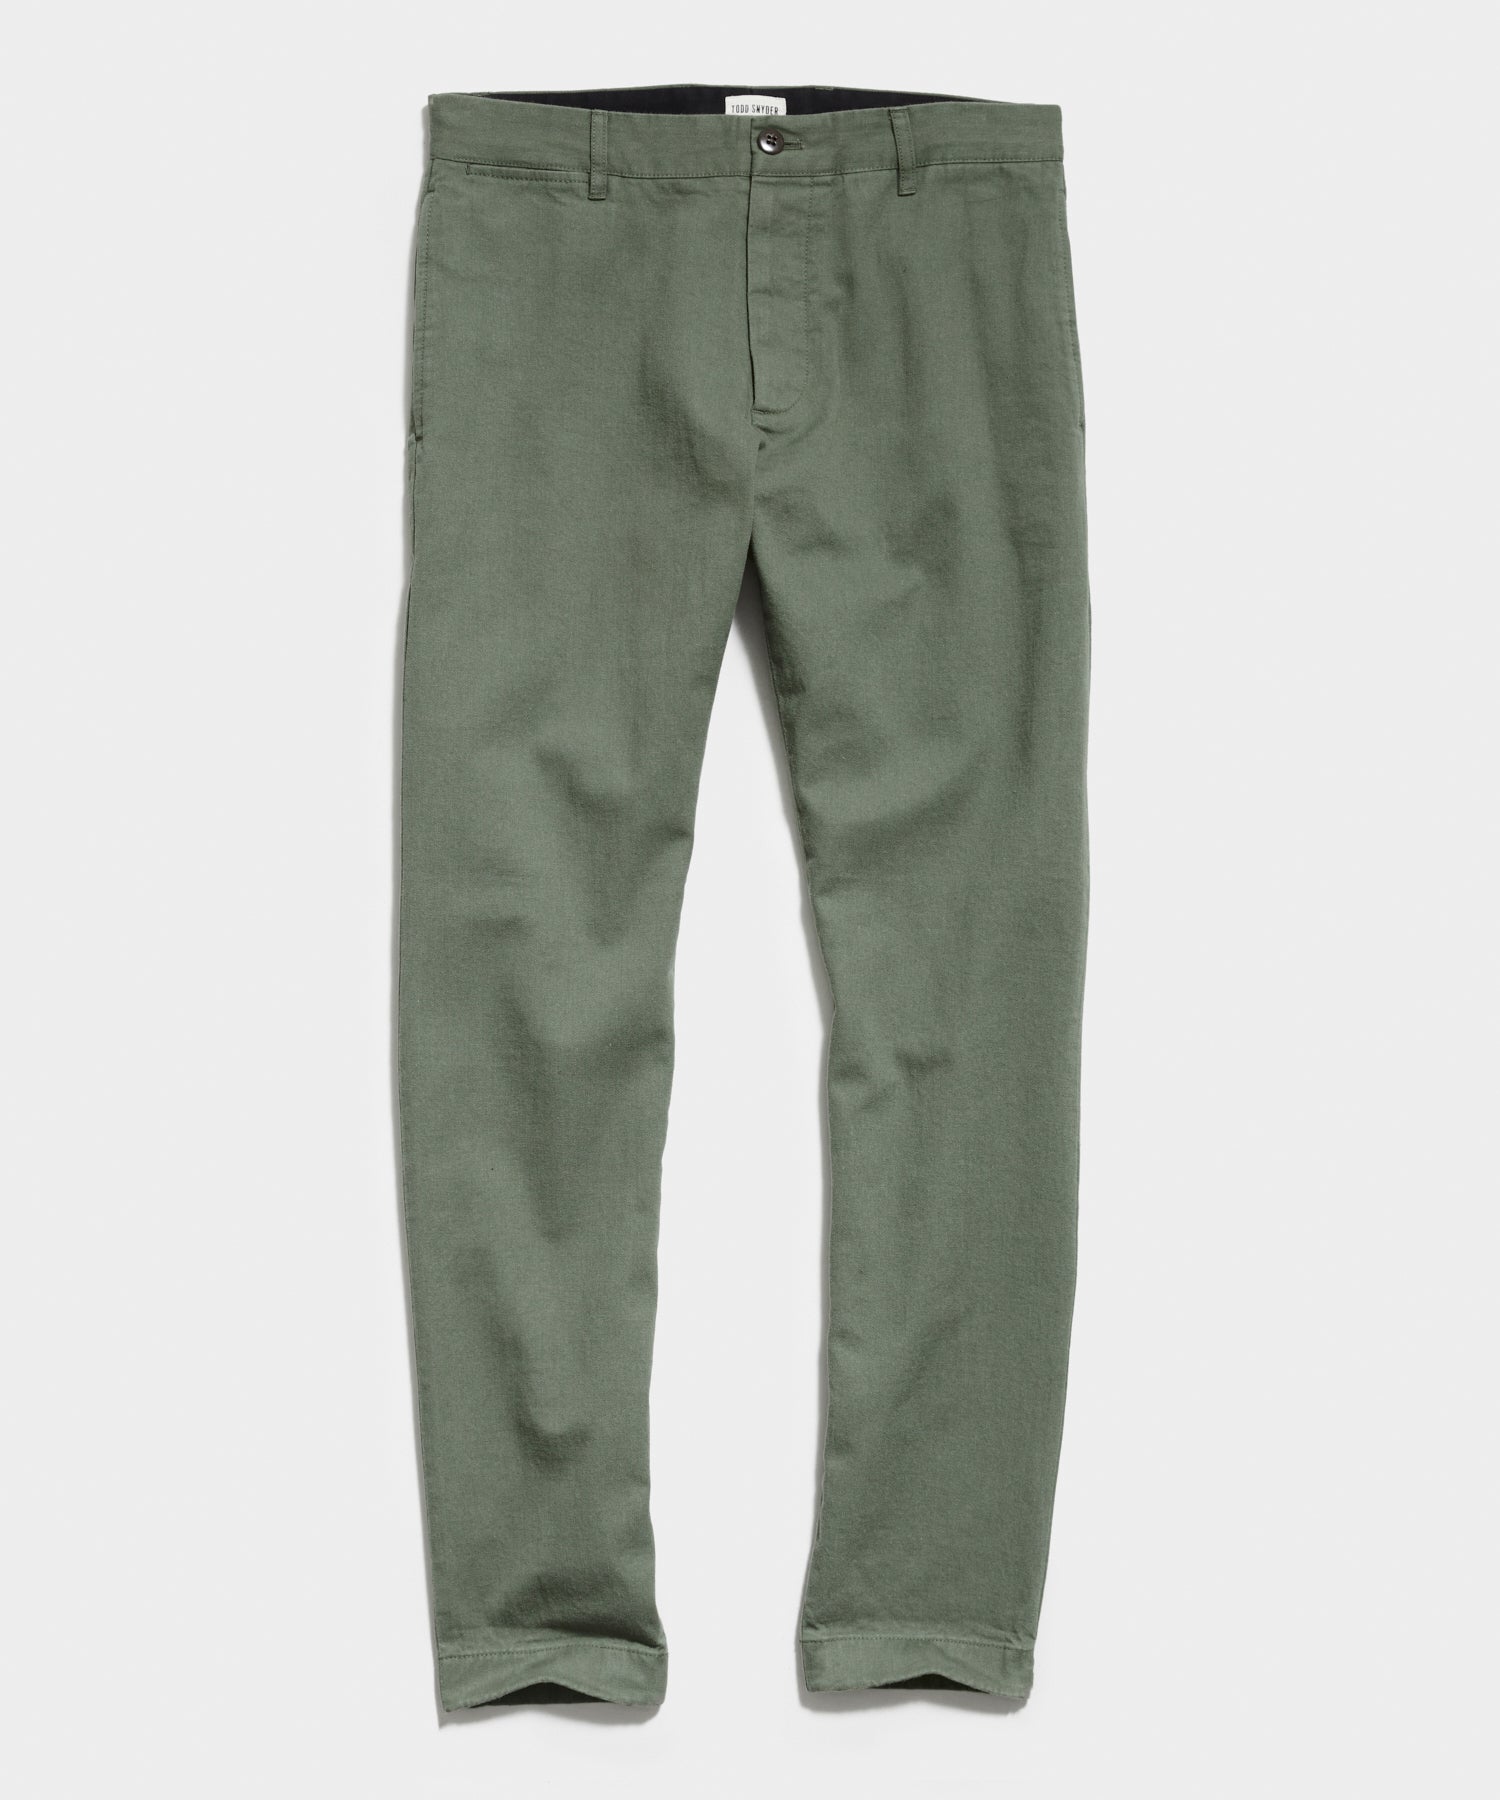 Japanese Selvedge Chino Pant in Olive